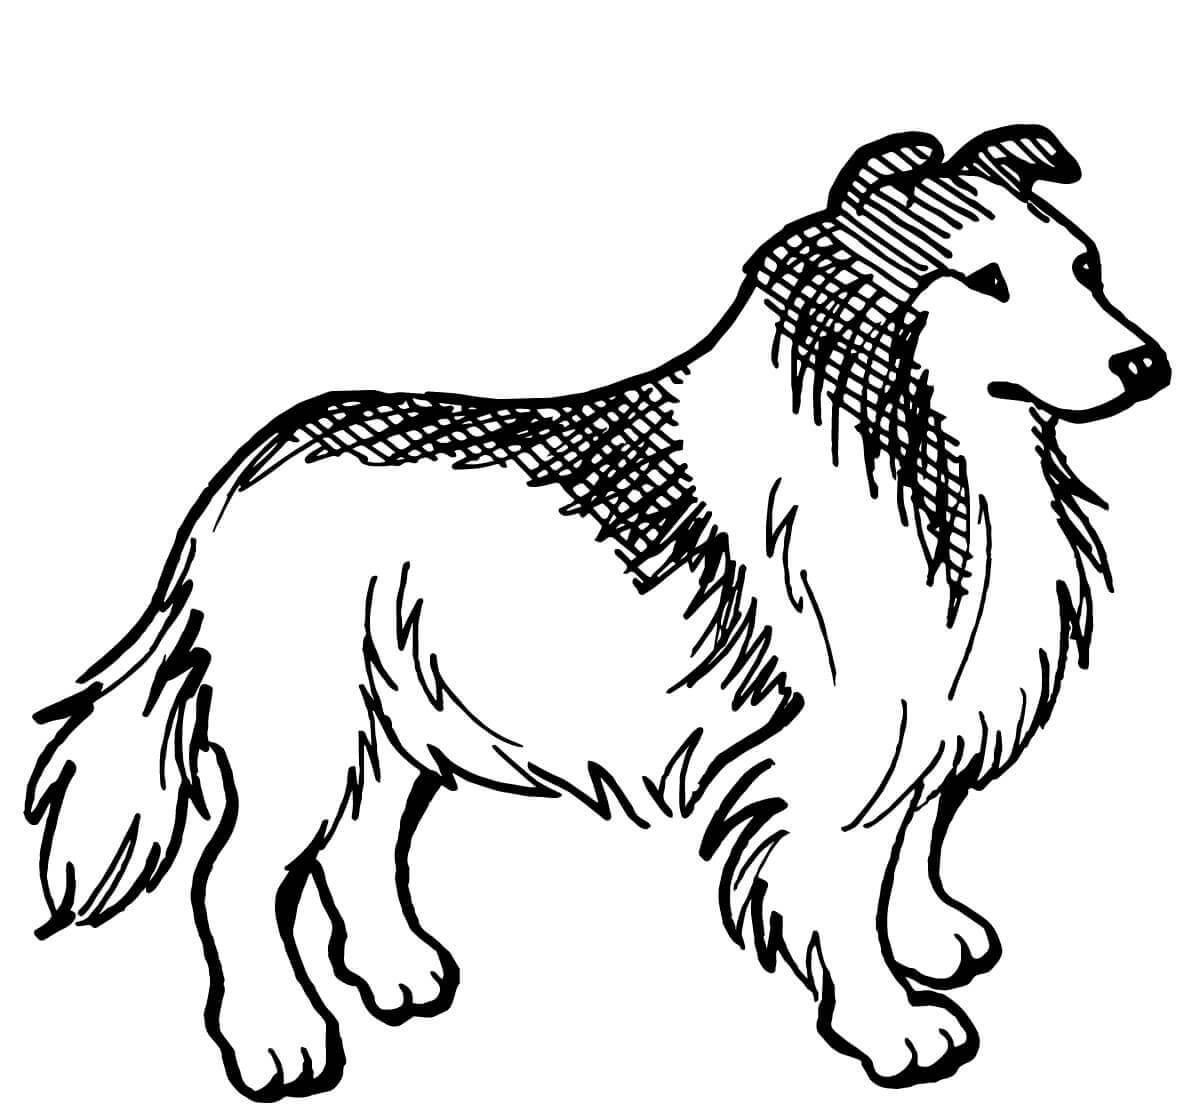 Rough Collie black and white from Dogs